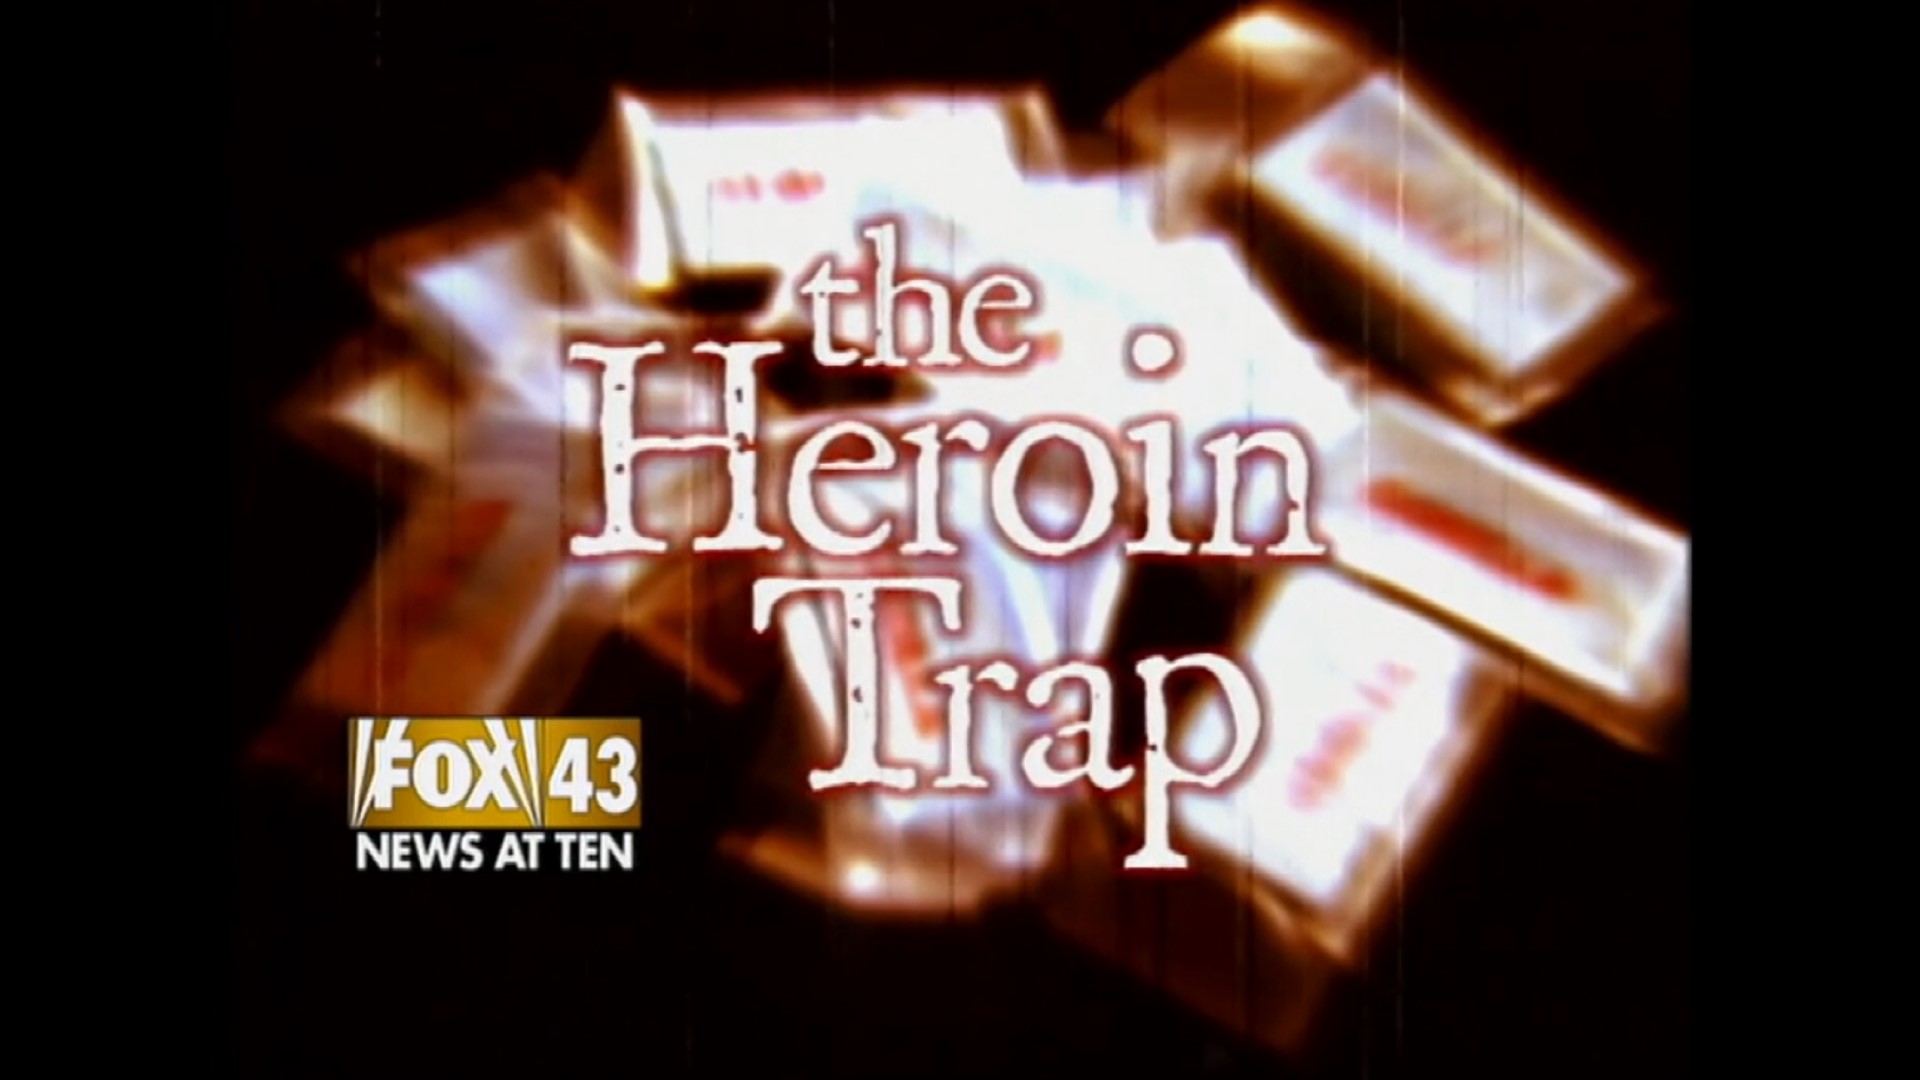 The heroin epidemic in Central Pa. had reached a boiling point in the late 1990s. This special showed how people in the were finding these drugs, and the impact.